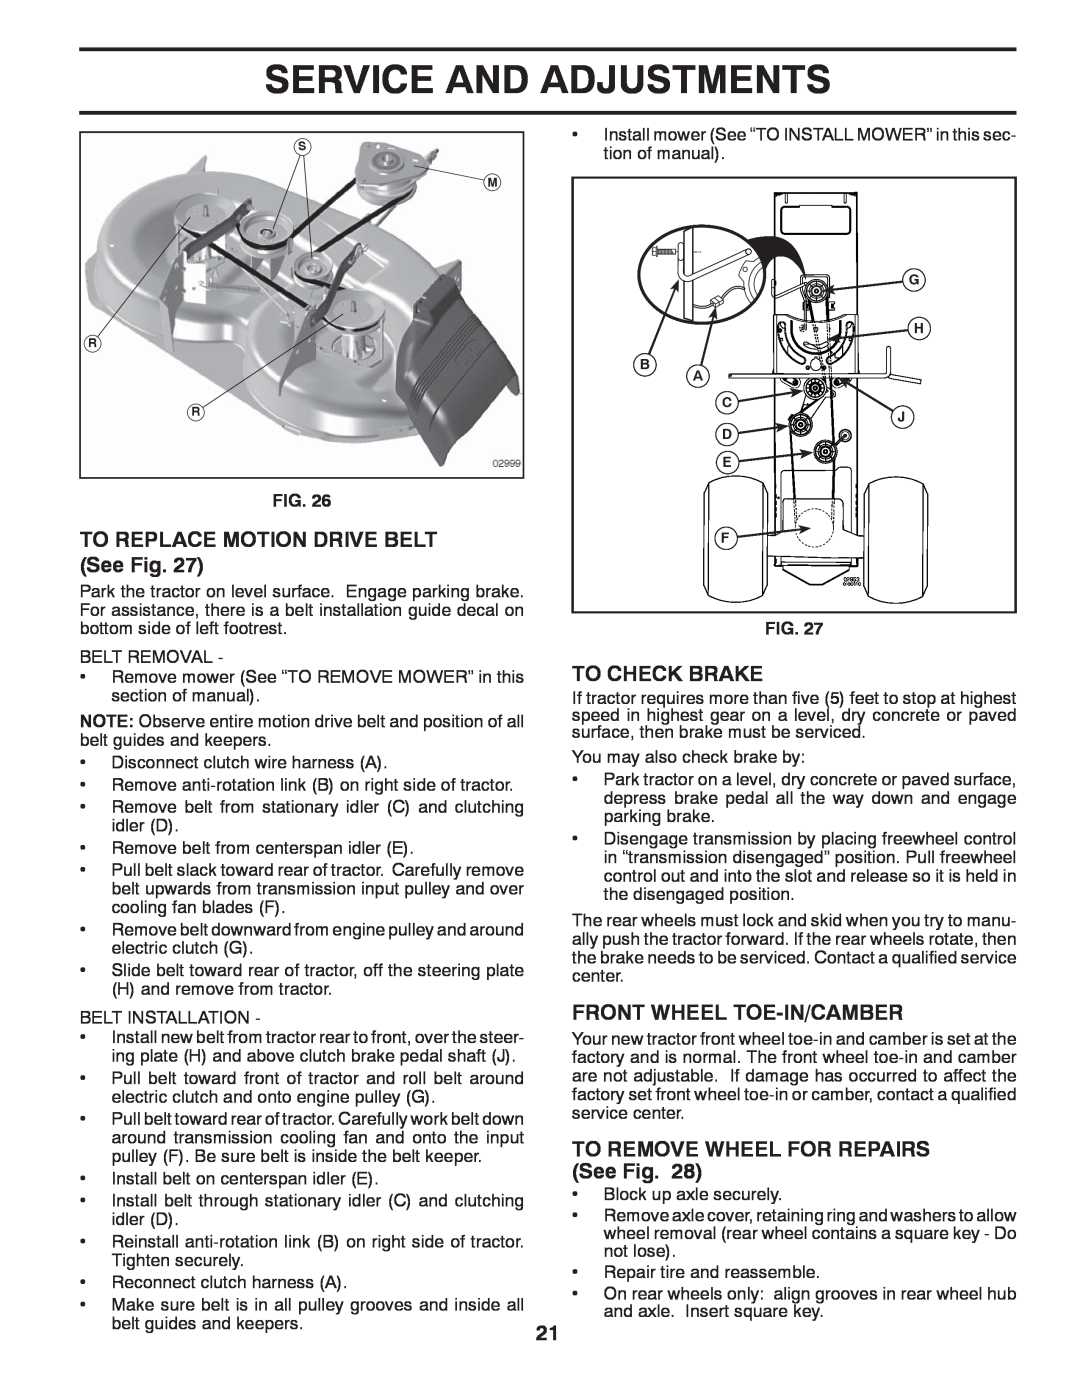 Husqvarna YTH1542XPT owner manual TO REPLACE MOTION DRIVE BELT See Fig, To Check Brake, Front Wheel Toe-In/Camber 